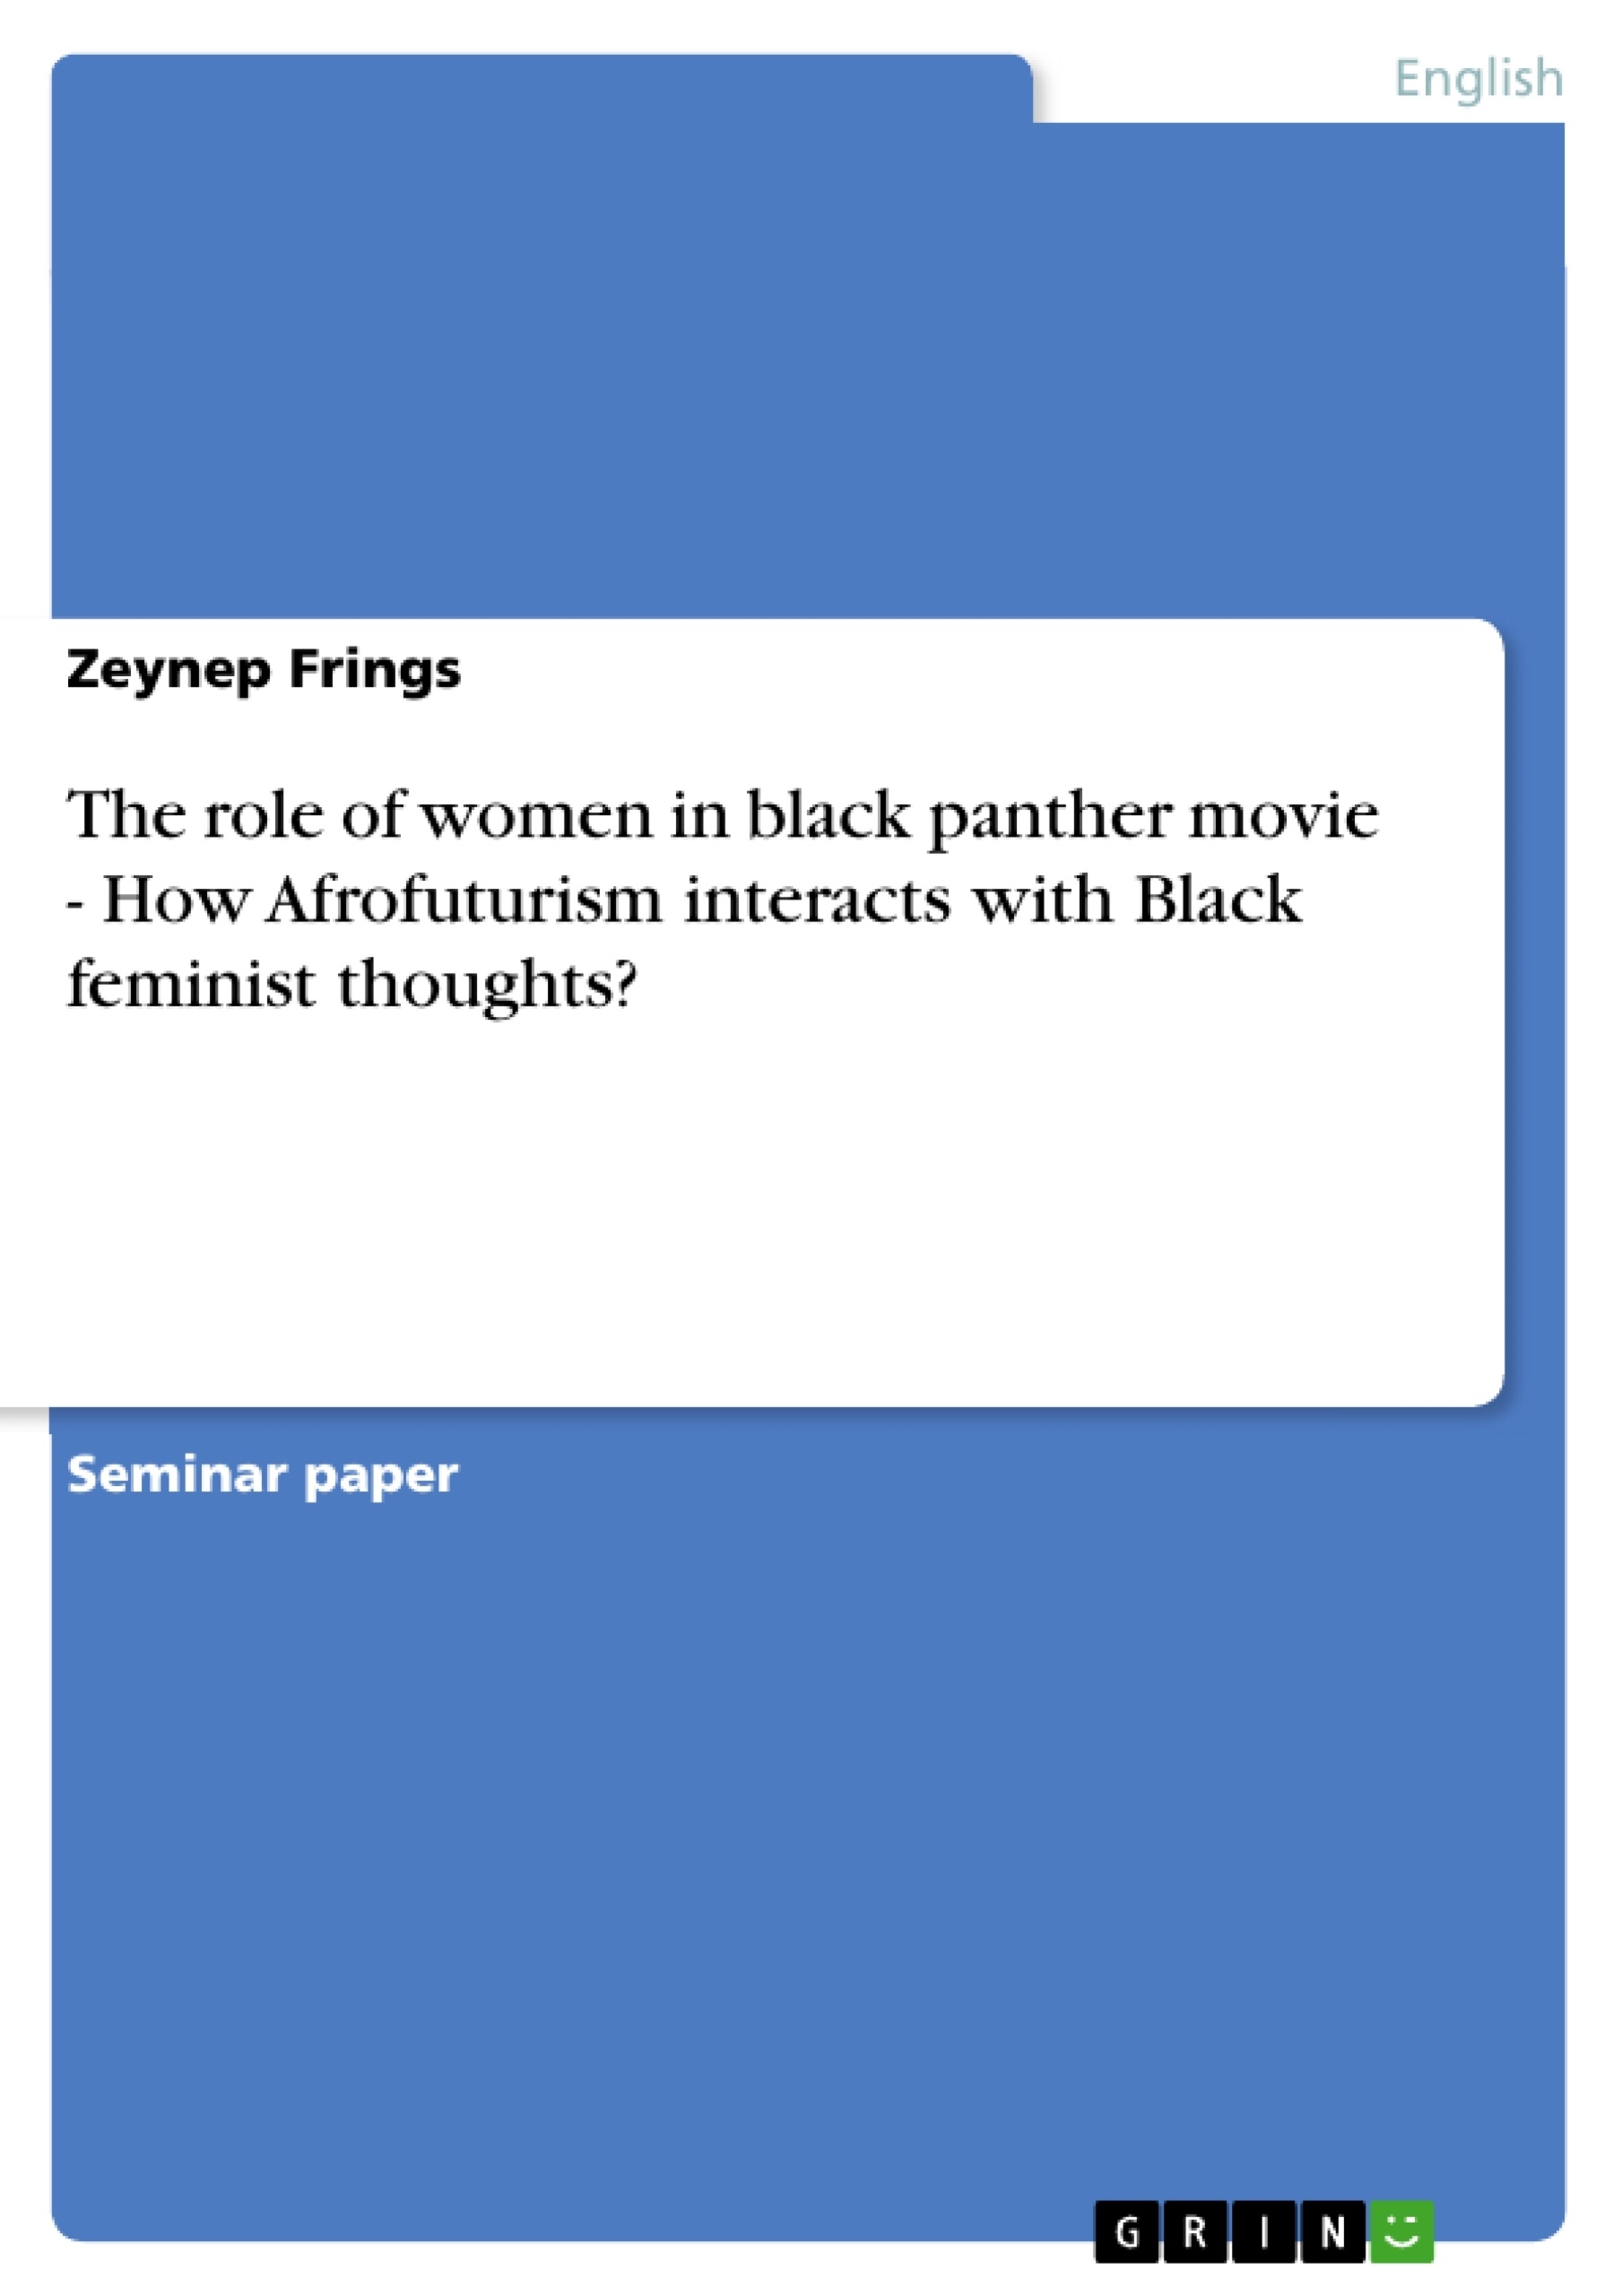 Title: The role of women in black panther movie - How Afrofuturism interacts with Black feminist thoughts?